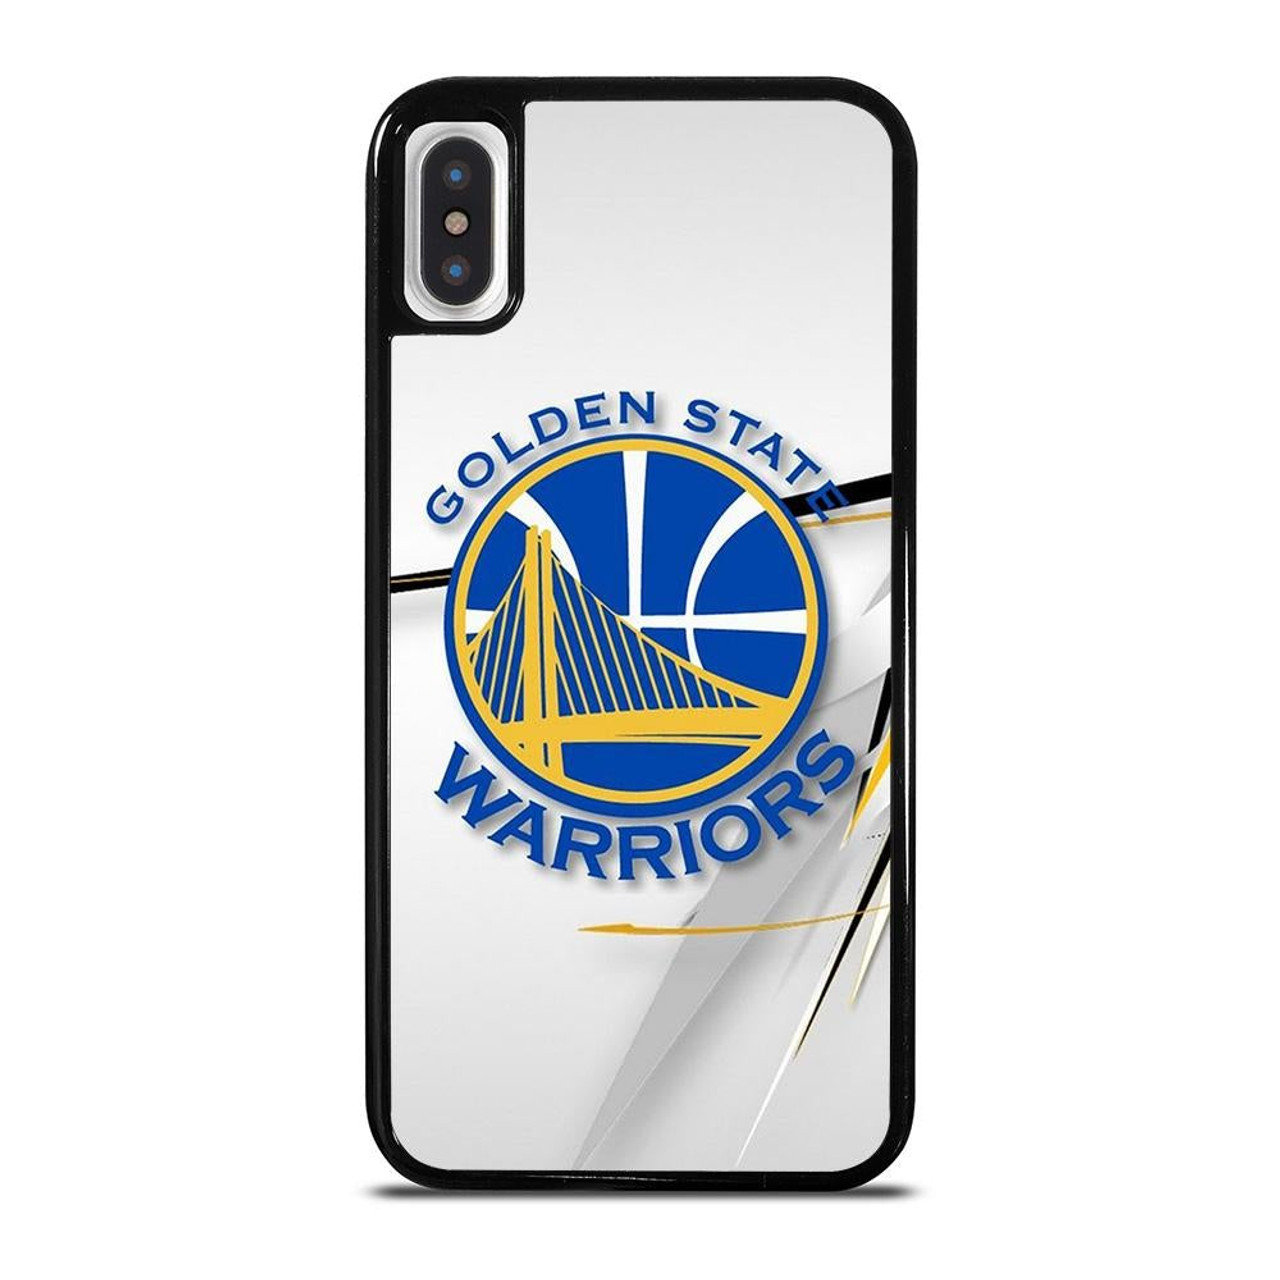 Golden State Warriors on X: The Golden State Warriors have